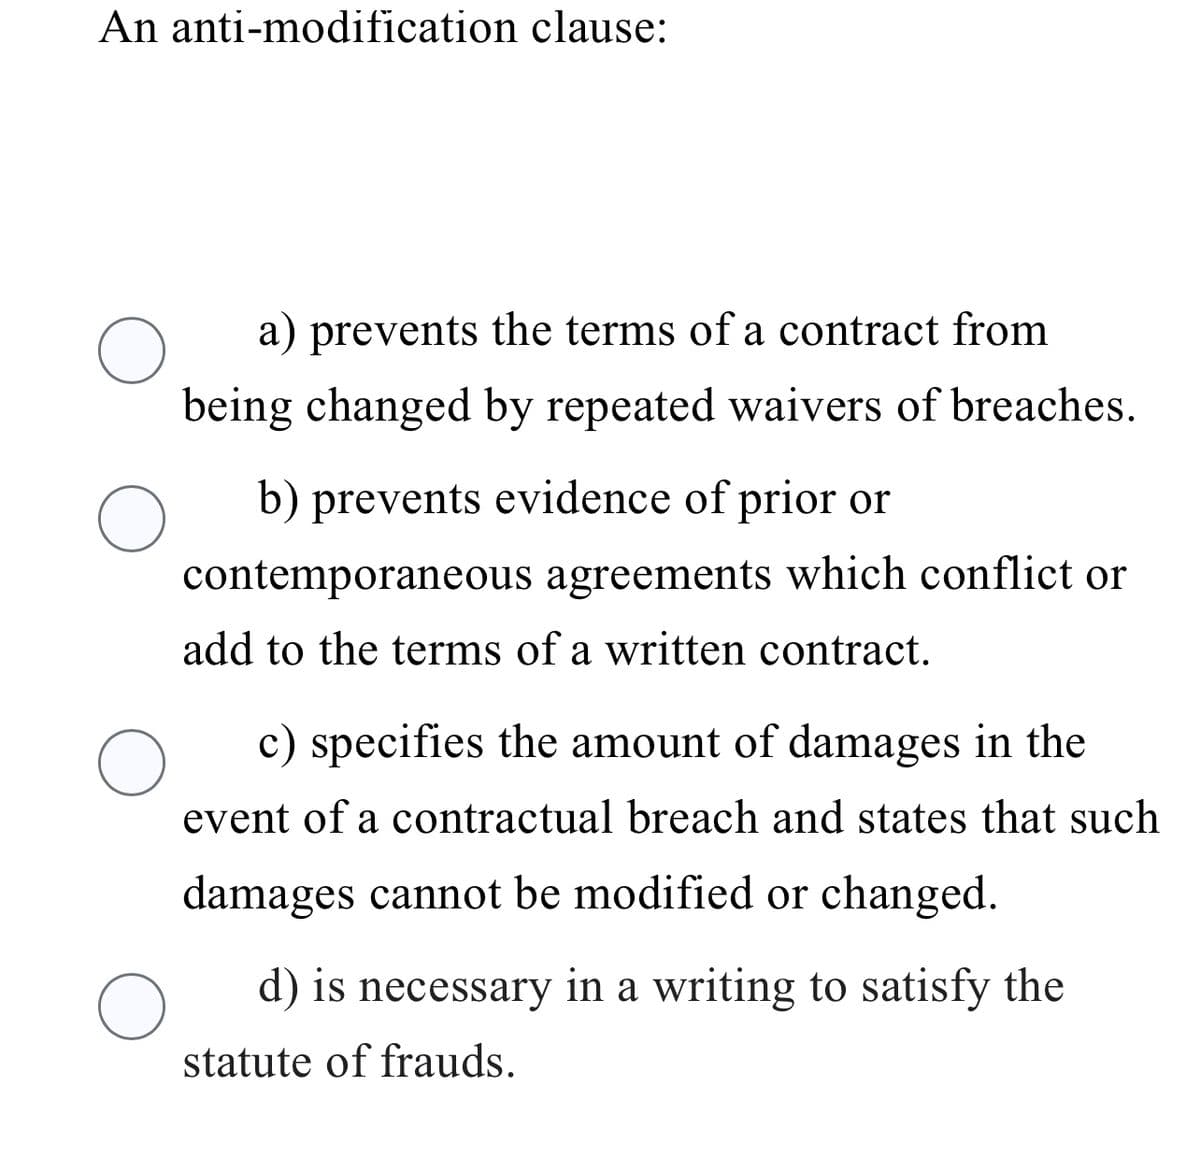 An anti-modification clause:
O
a) prevents the terms of a contract from
being changed by repeated waivers of breaches.
O
b) prevents evidence of prior or
contemporaneous agreements which conflict or
add to the terms of a written contract.
O
c) specifies the amount of damages in the
event of a contractual breach and states that such
damages cannot be modified or changed.
O
d) is necessary in a writing to satisfy the
statute of frauds.